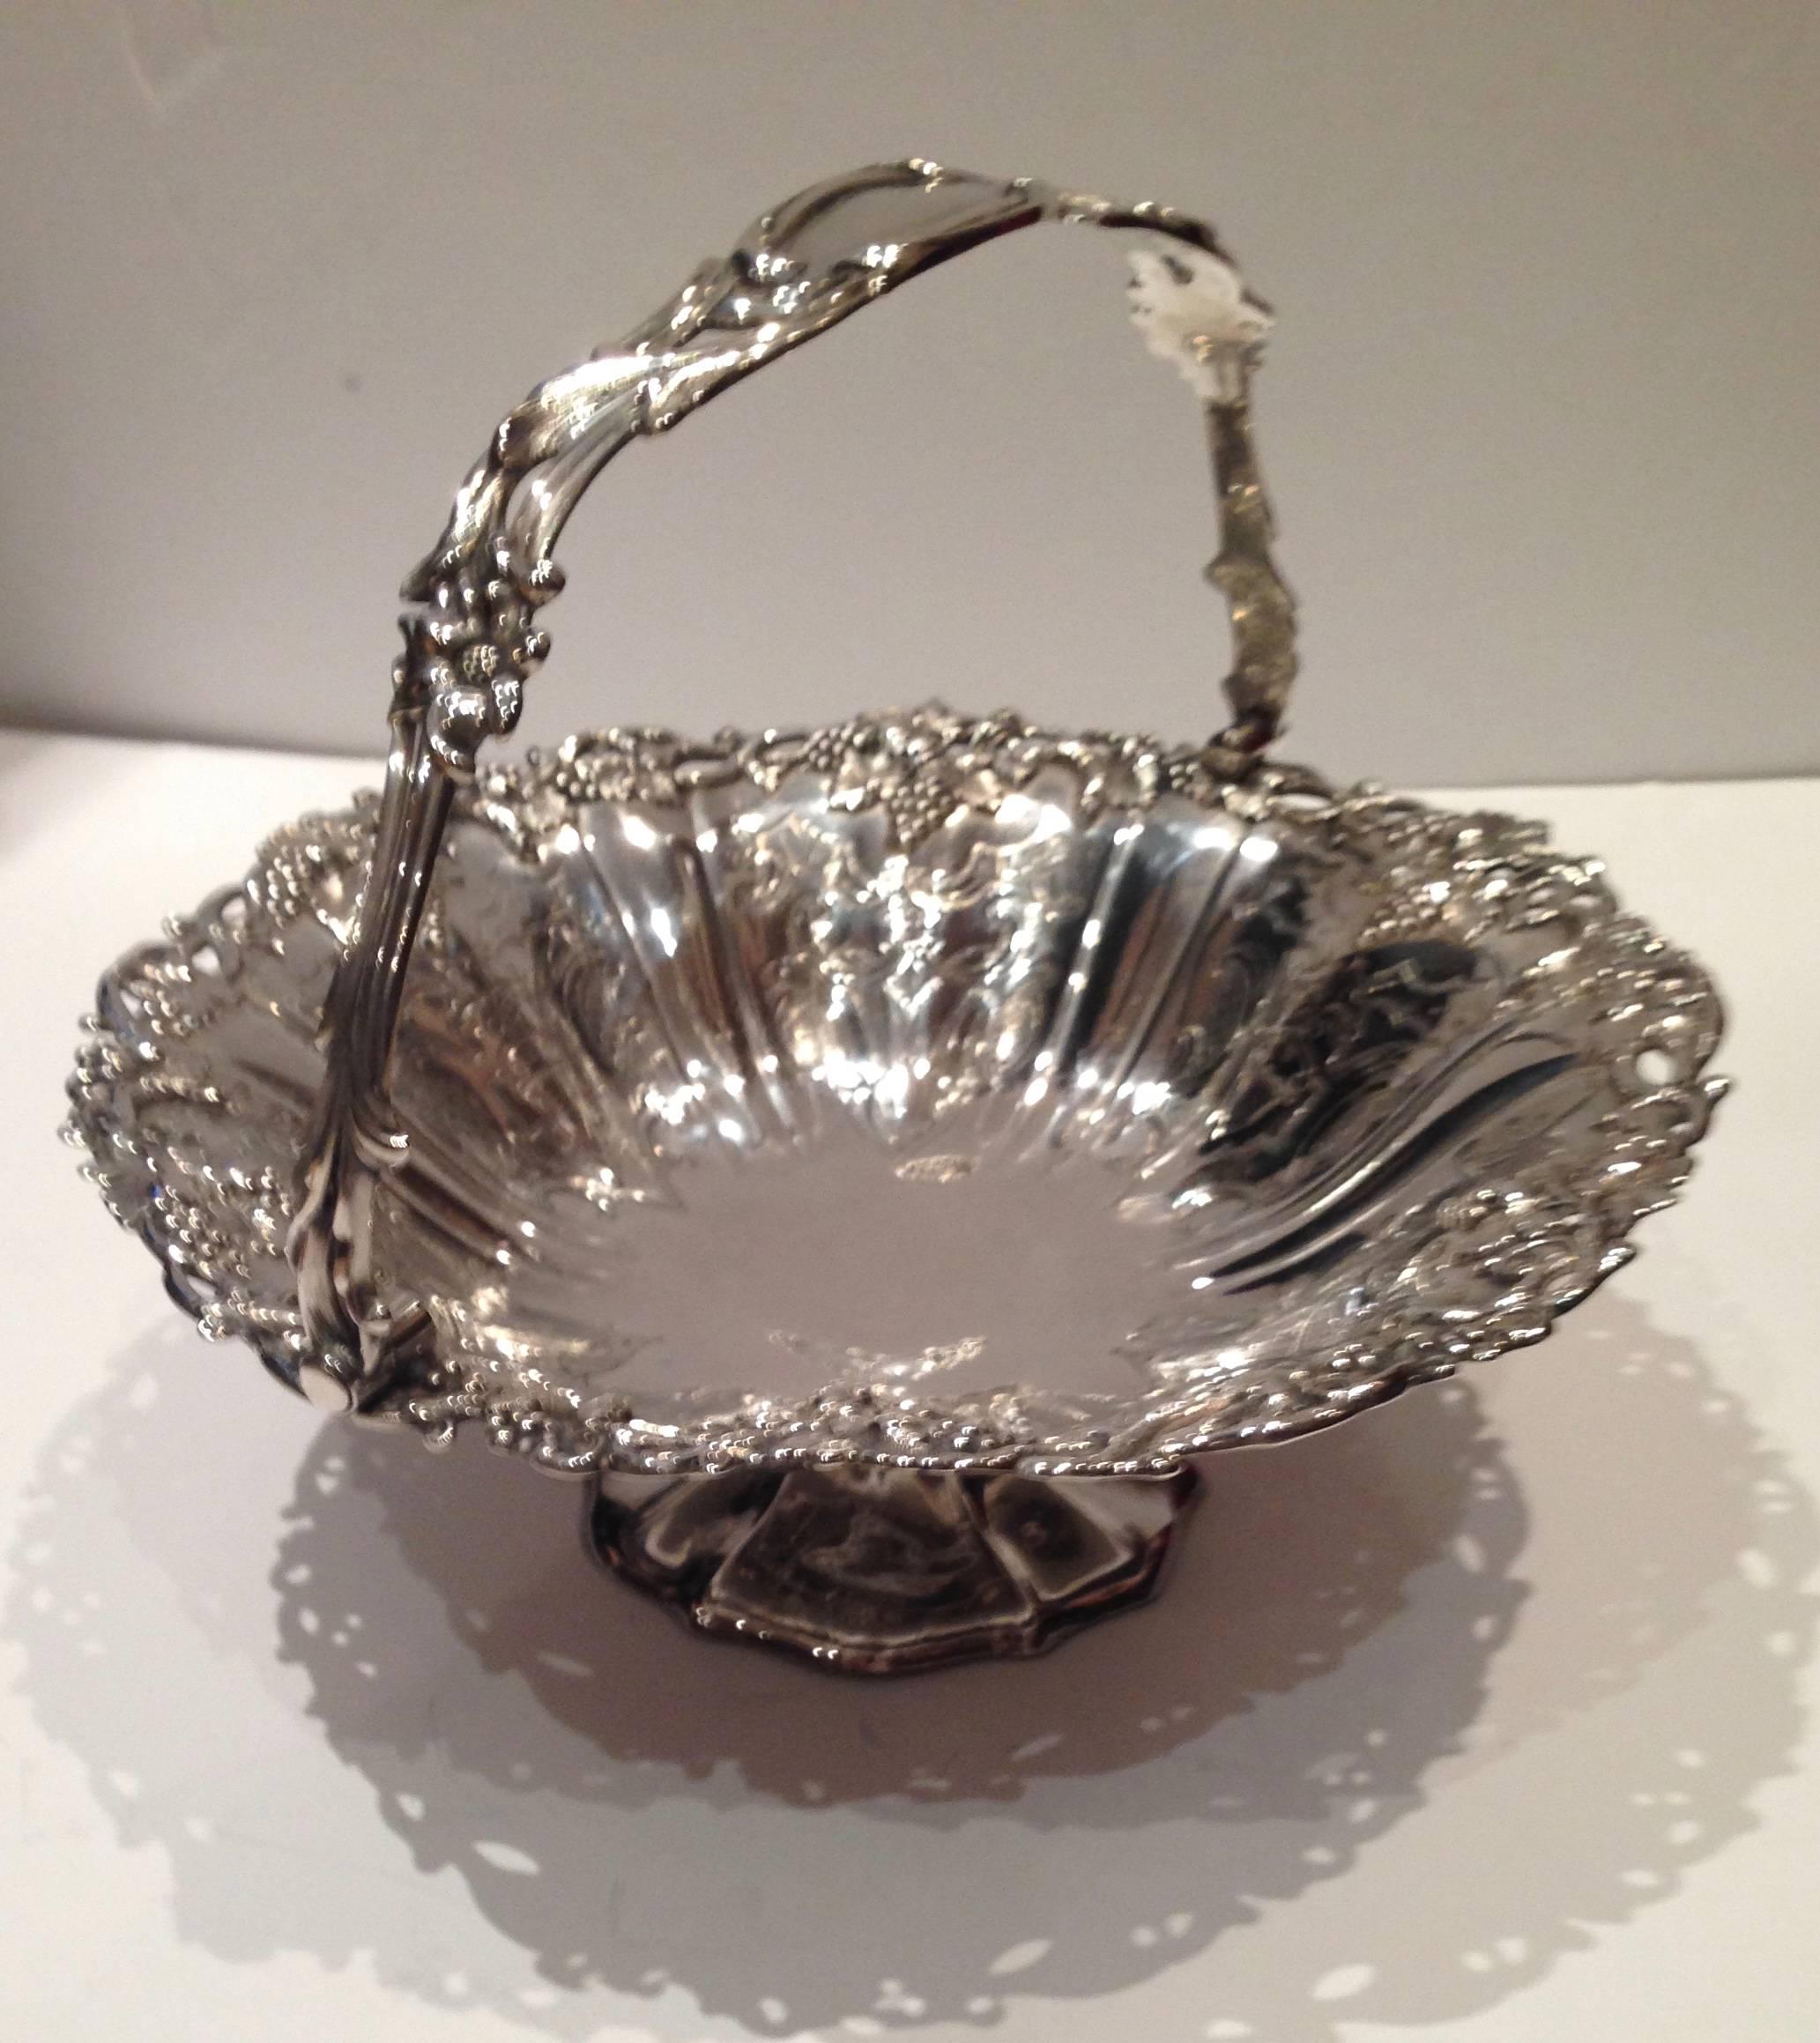 Solid silver basket with swing handle. Silversmiths John Roberts Sheffield, 1845. This finely made silver Basket was given to Sir Michael Costa by Queen Victoria. It is engraved around the base. The gift of the Queen to Sir Michael Costa. Sir